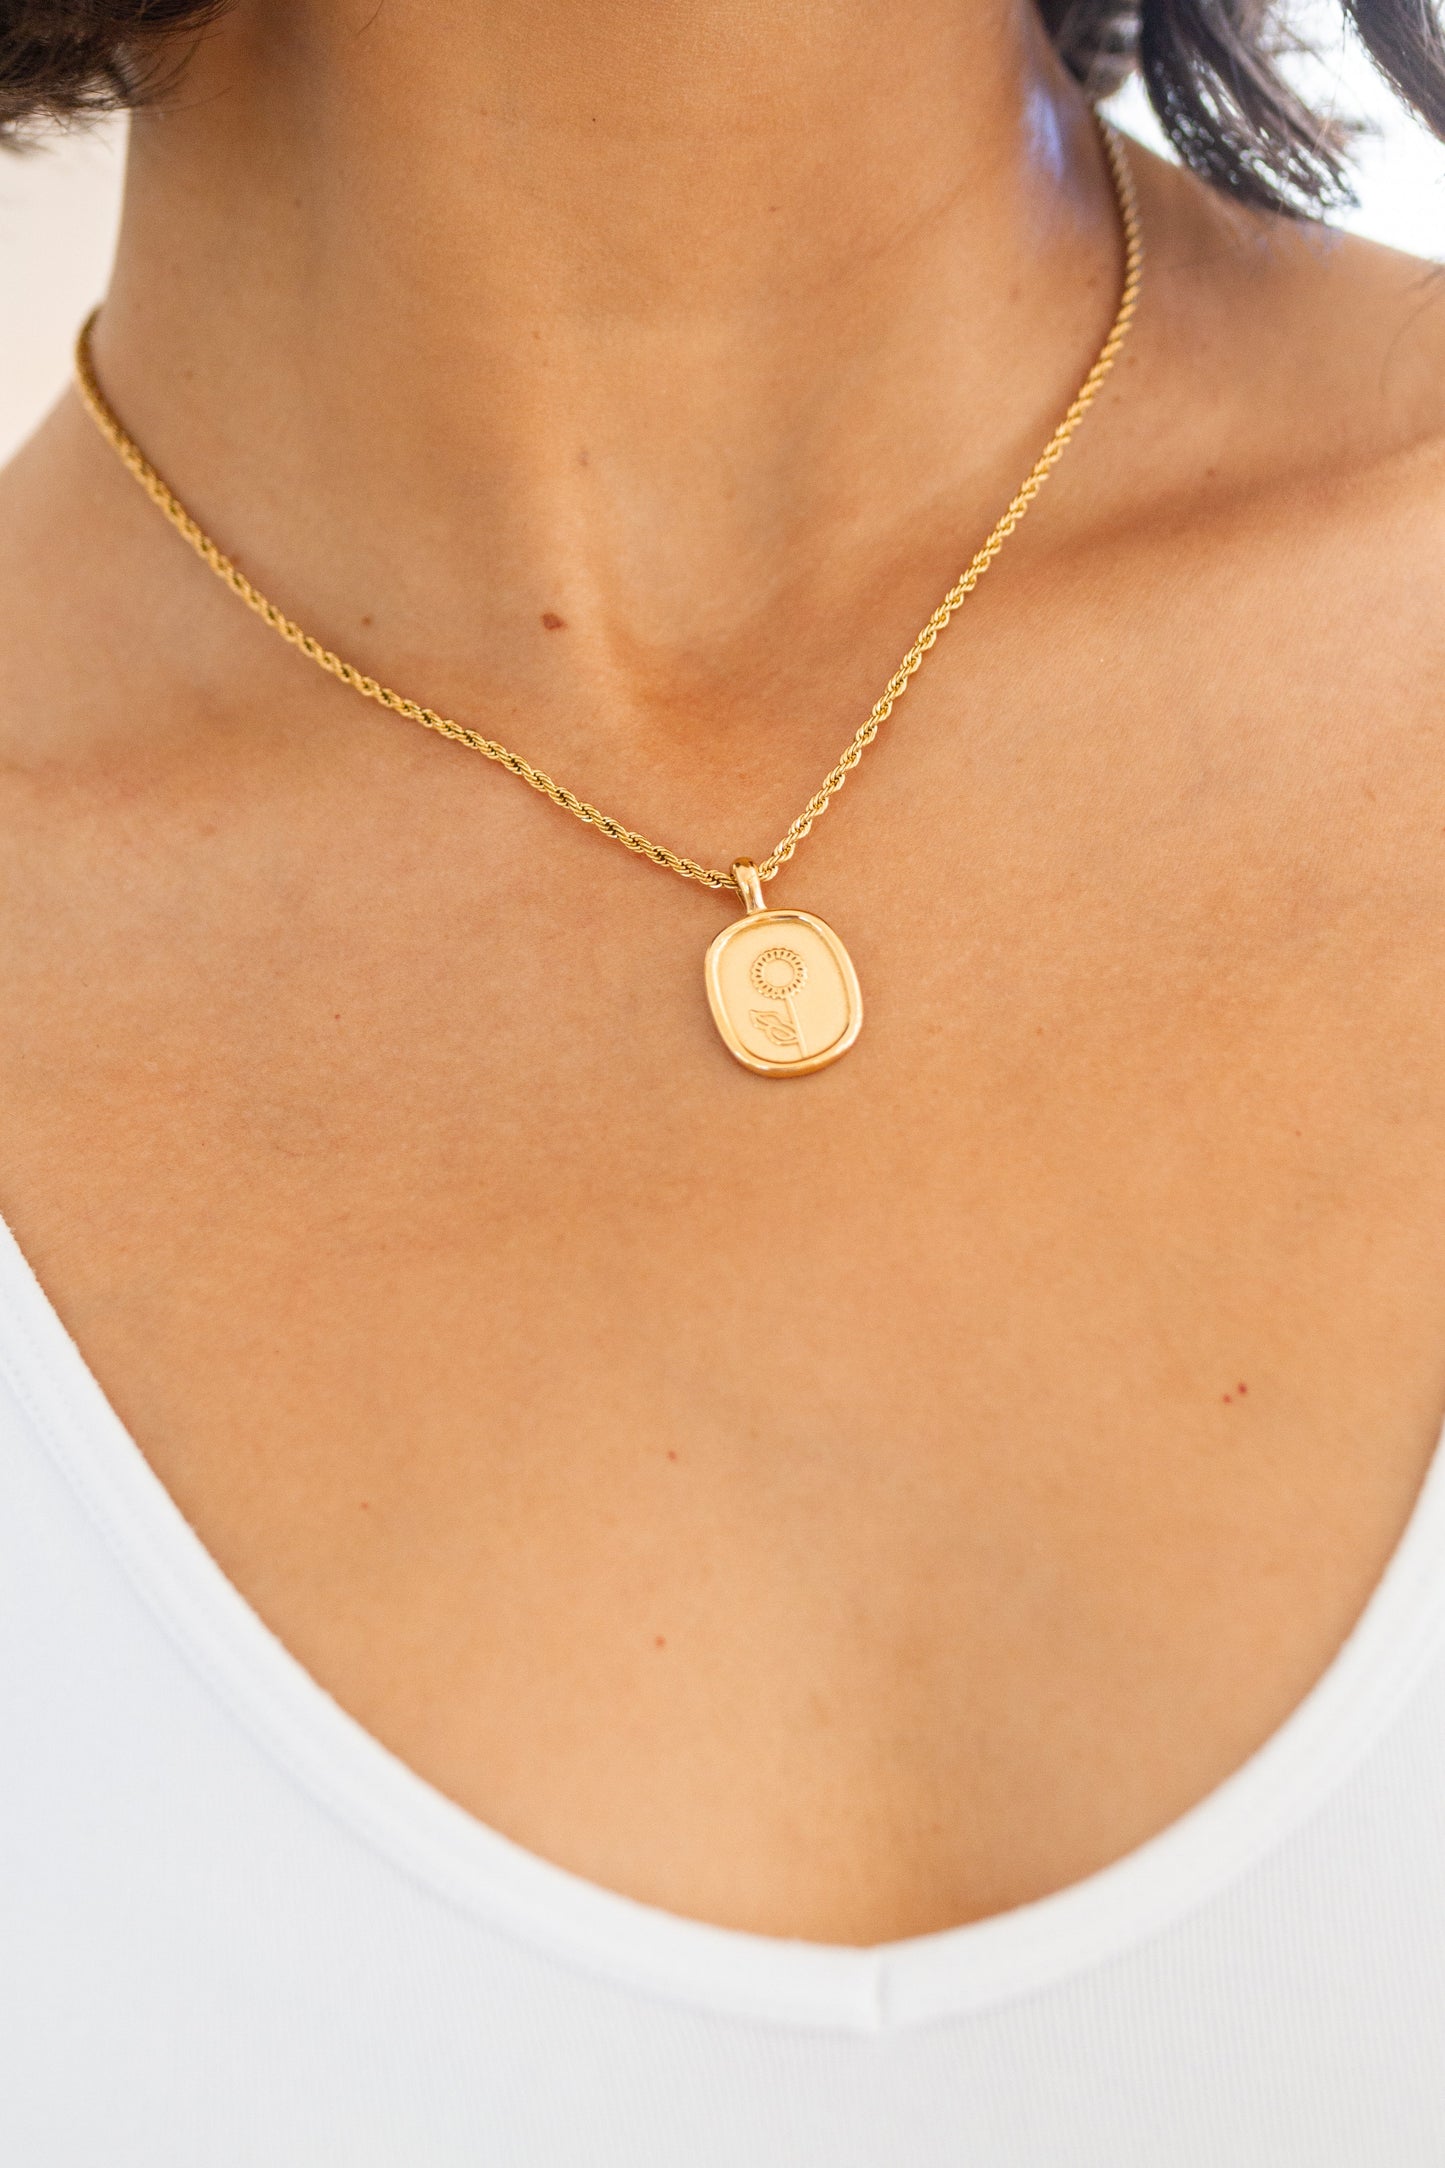 Waterproof Jewelry: Simple Sunflower Pendent Necklace